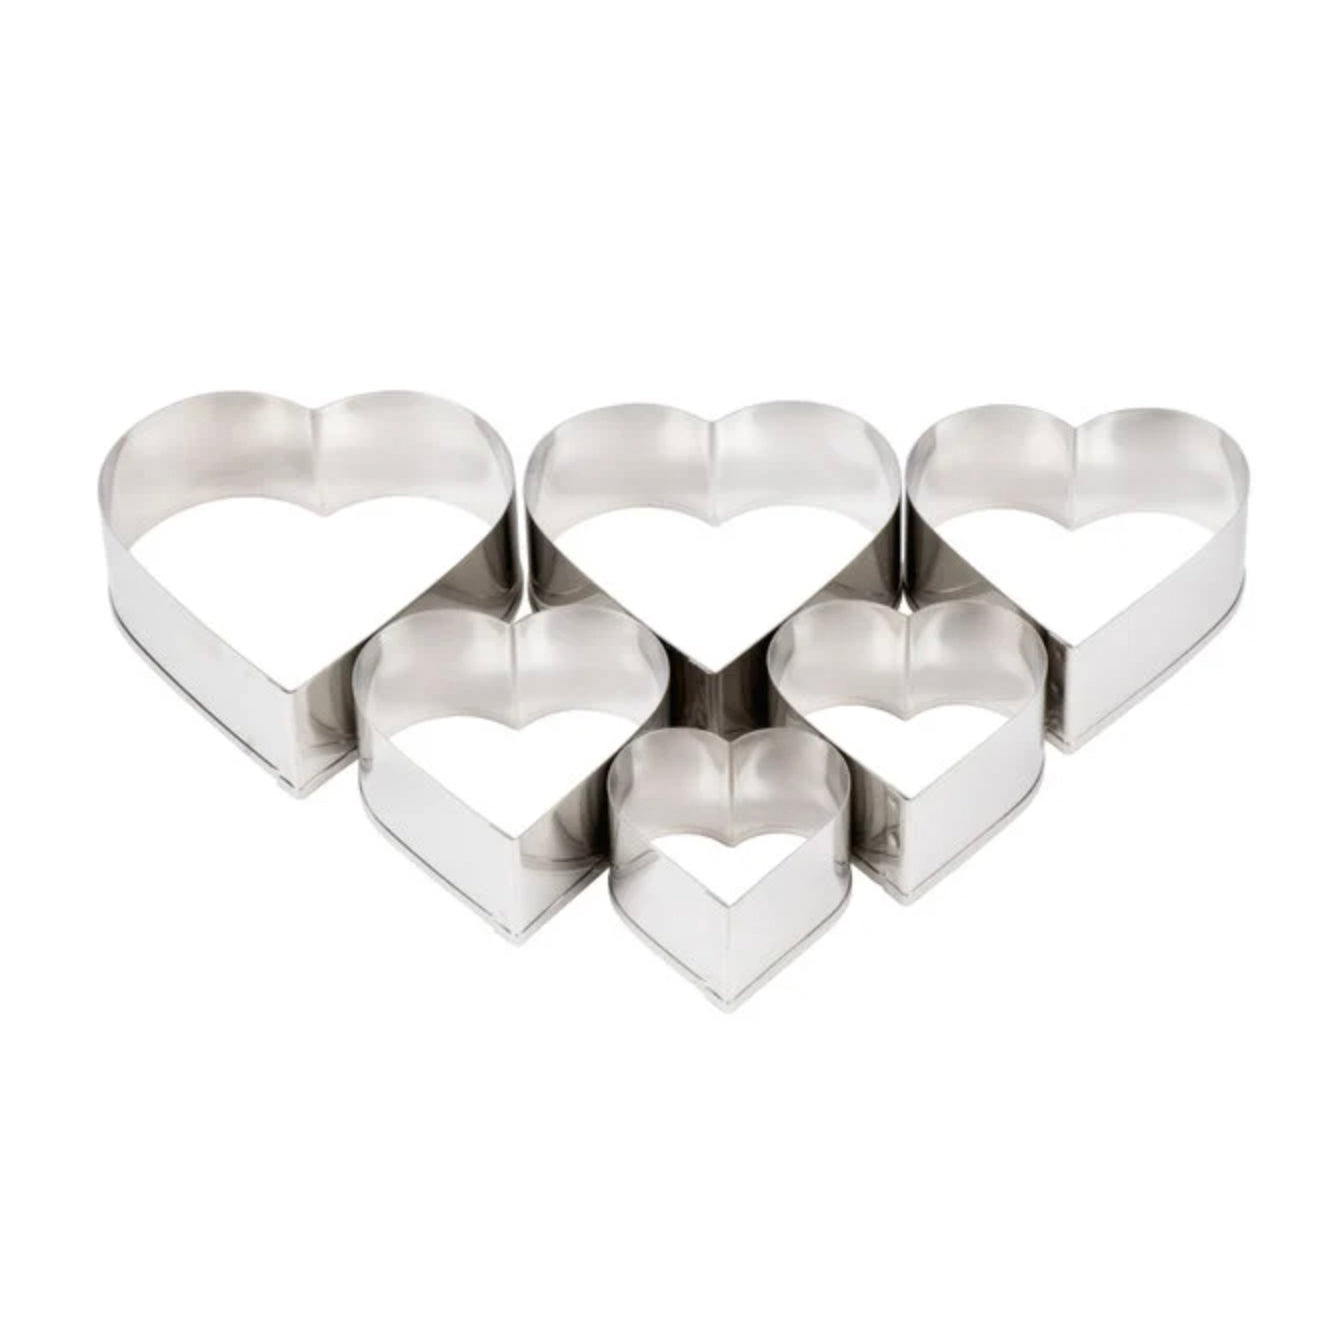 ATECO S/S Heart Cutters (set of 6)